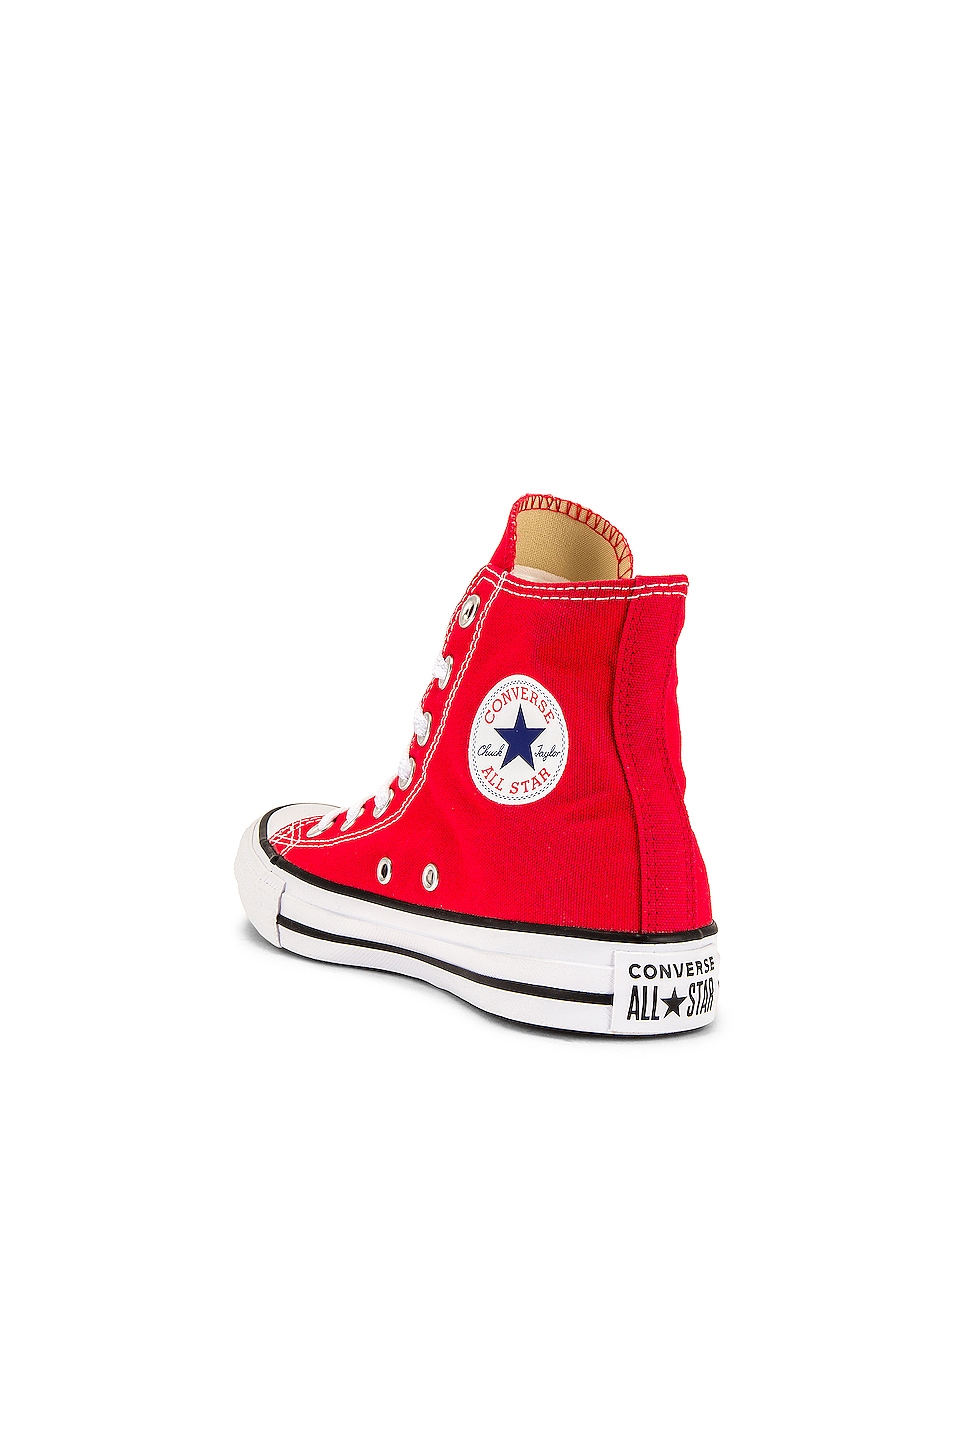 Converse Chuck Taylor All Star Hi Sneaker in Red | REVOLVE